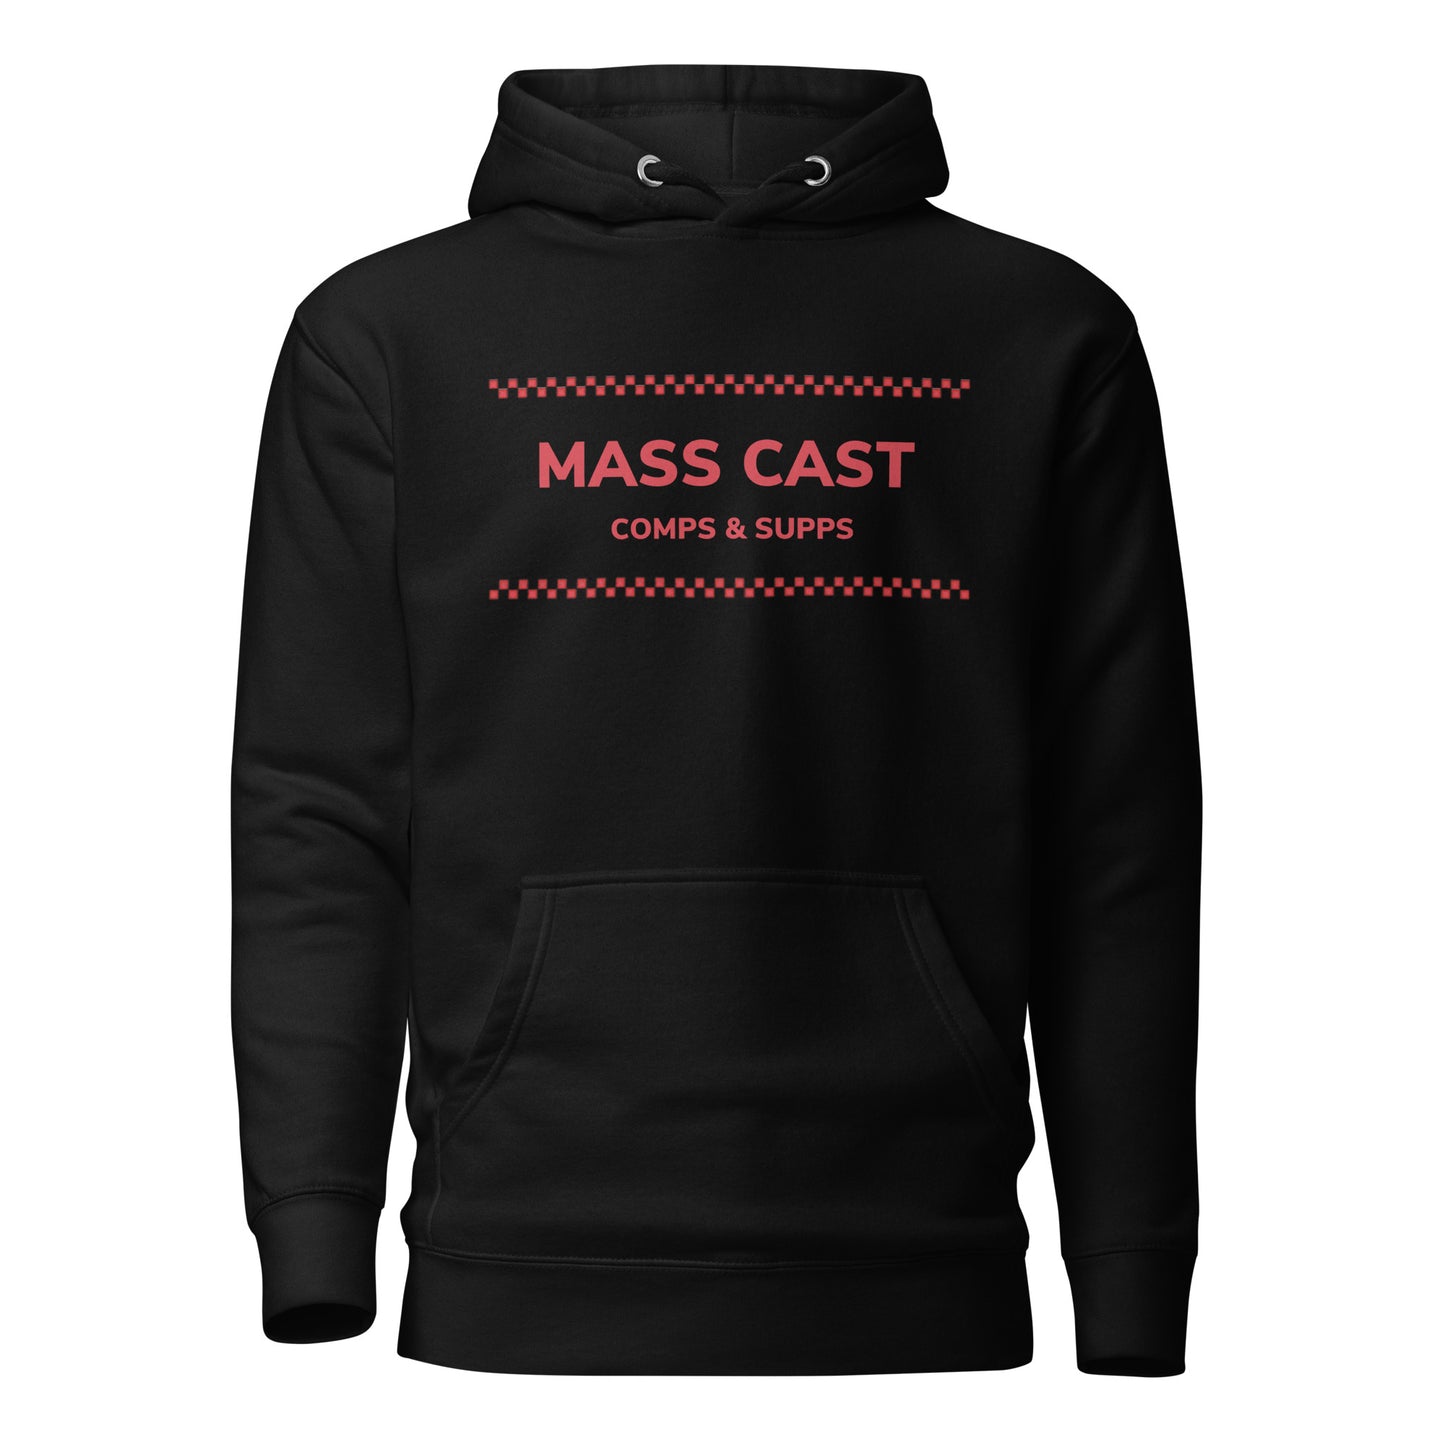 Comps & Supps Soft Style Hoodie by Mass Cast